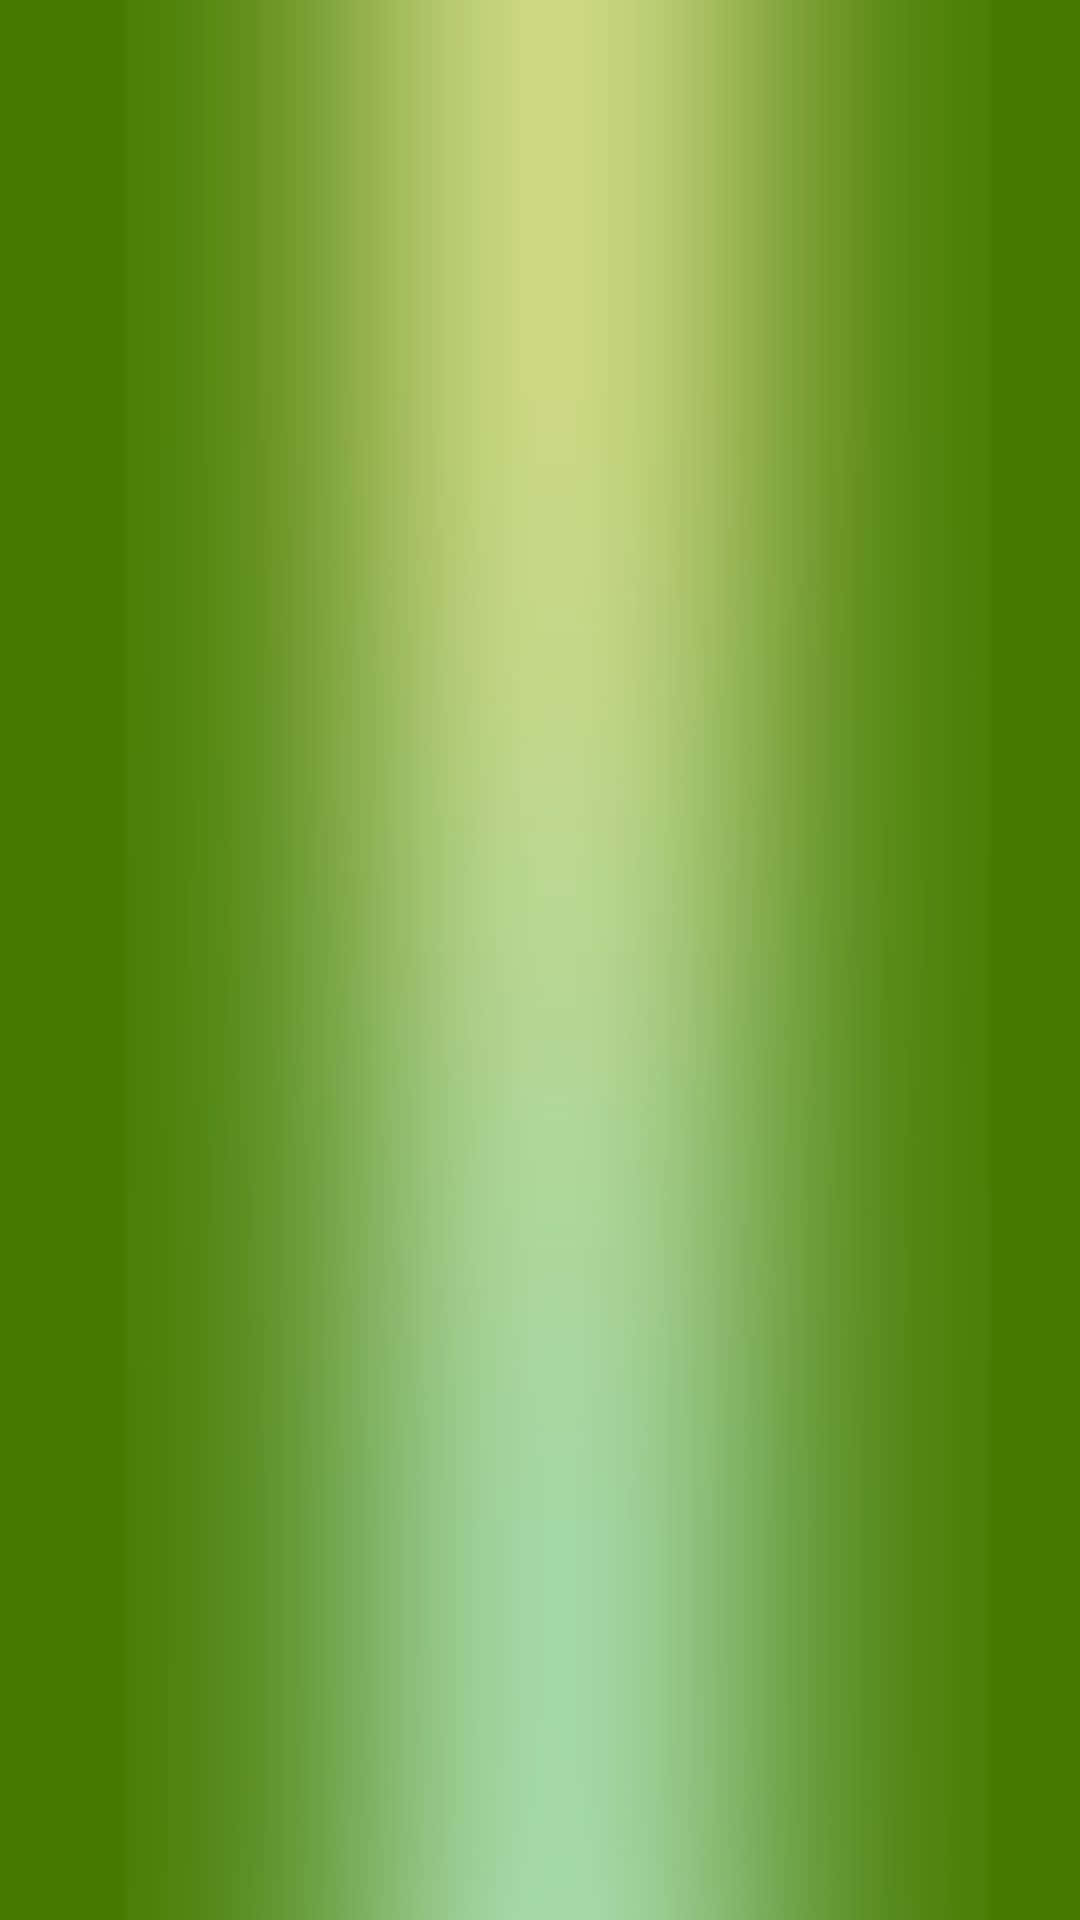 A Green And Blue Gradient Background